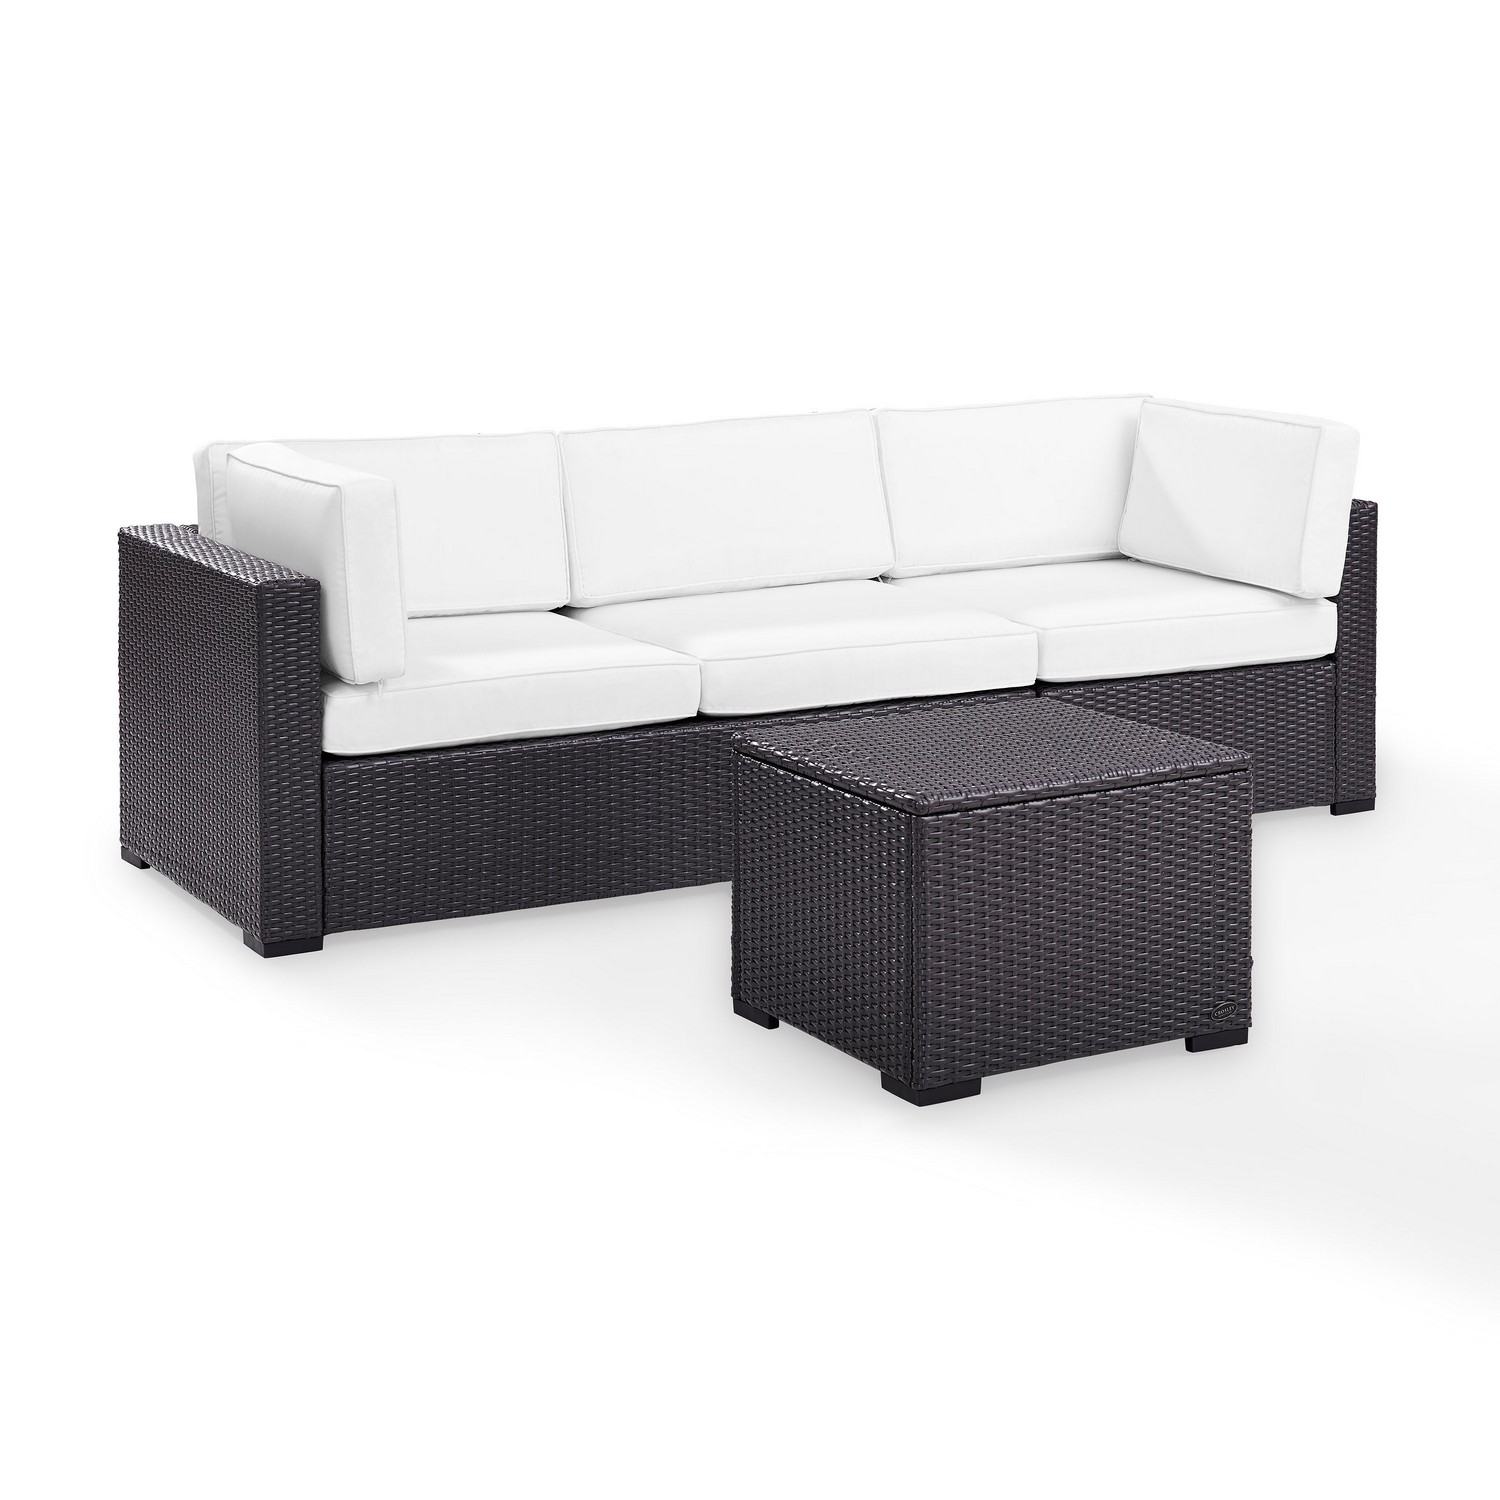 Crosley Biscayne 3-PC Outdoor Wicker Sectional Set - Loveseat, Corner Chair, Coffee Table - White/Brown